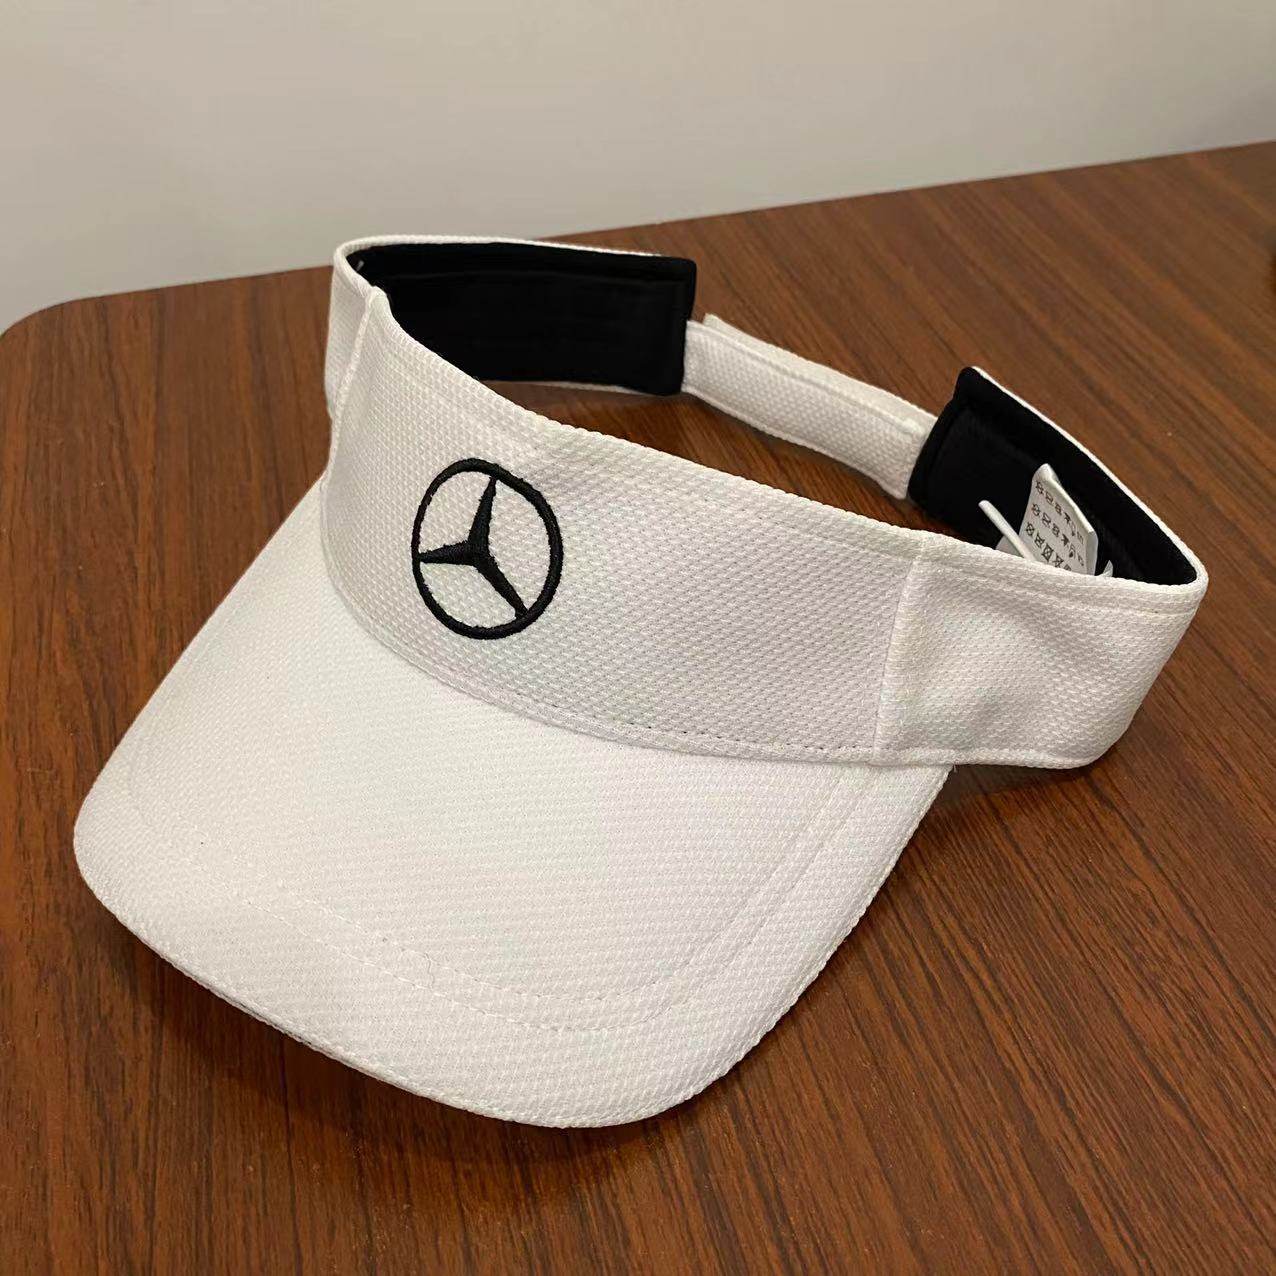 Benz hat sample white 100% polyester